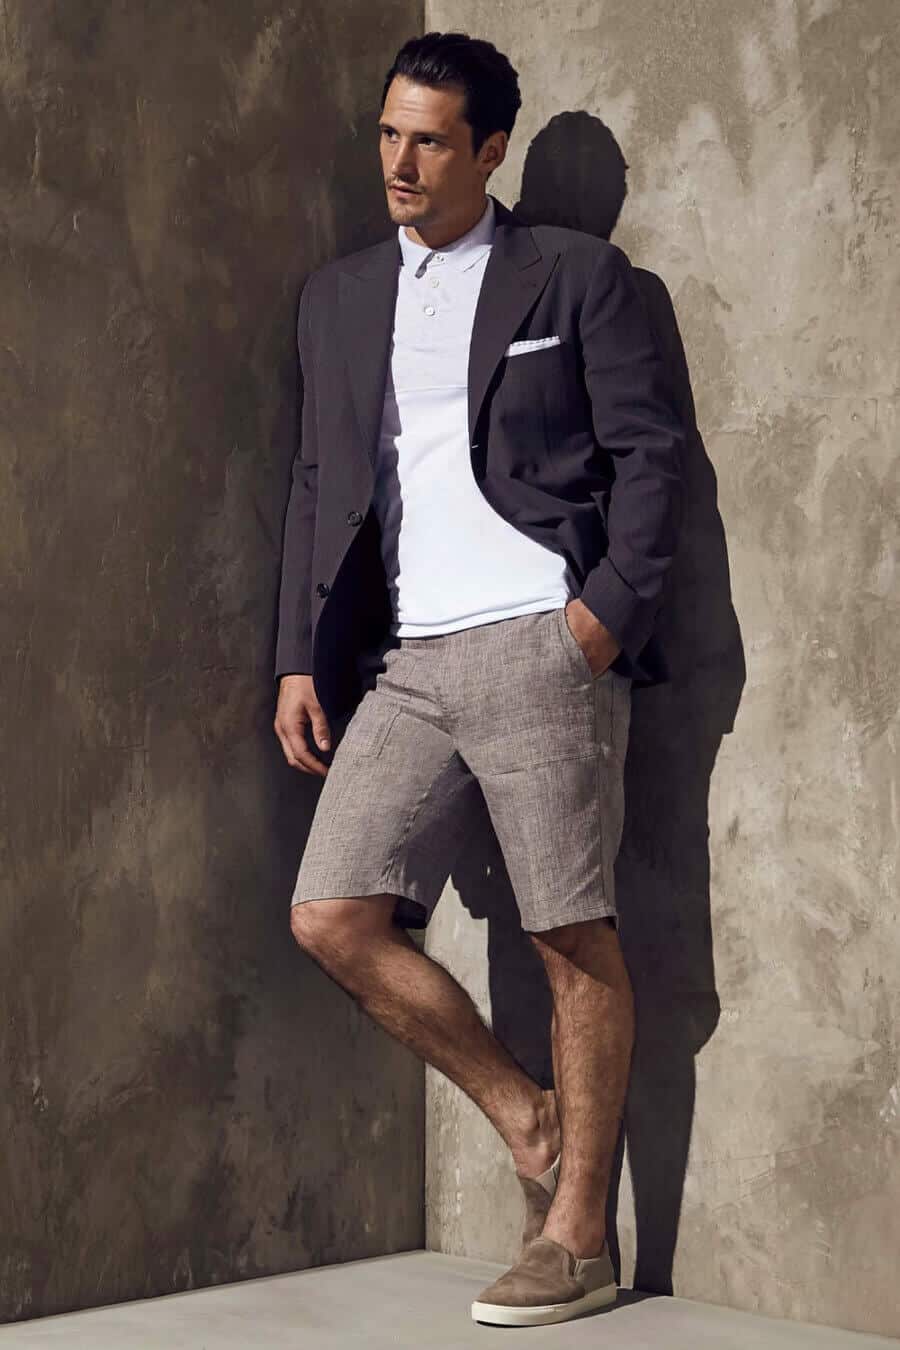 Men's tailored shorts with blazer, polo shirt and suede sneakers outfit